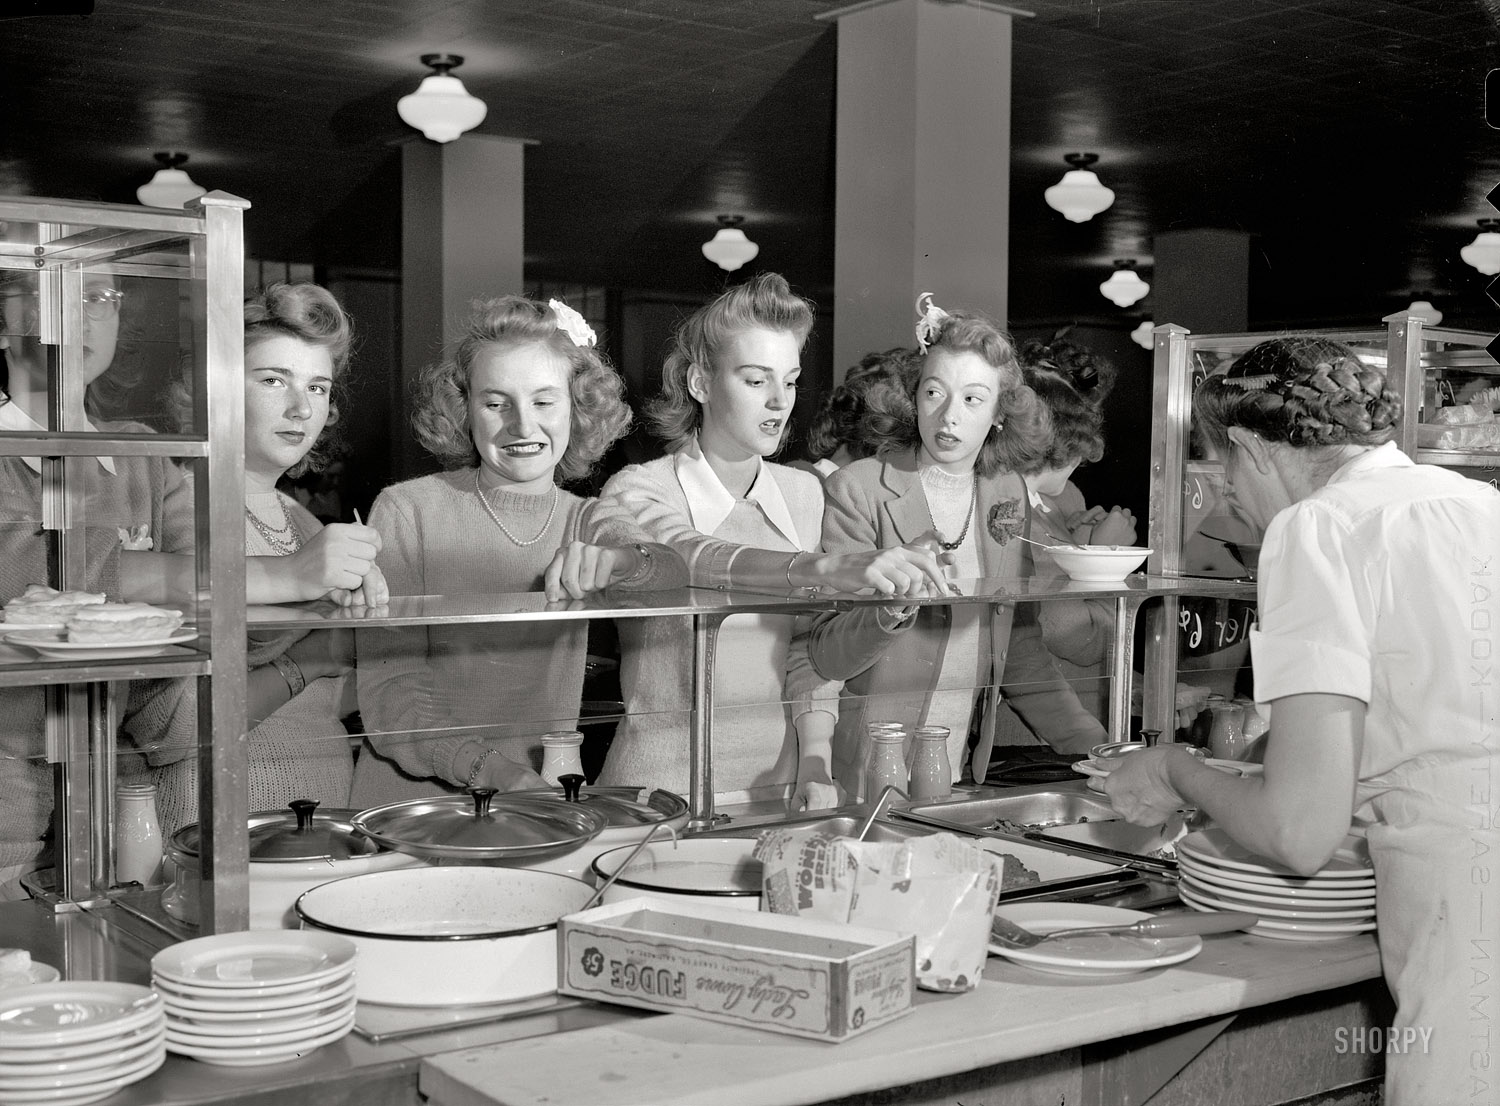 October 1943. Washington, D.C. "In the cafeteria at Woodrow Wilson High School." Photo by Esther Bubley, Office of War Information. View full size.